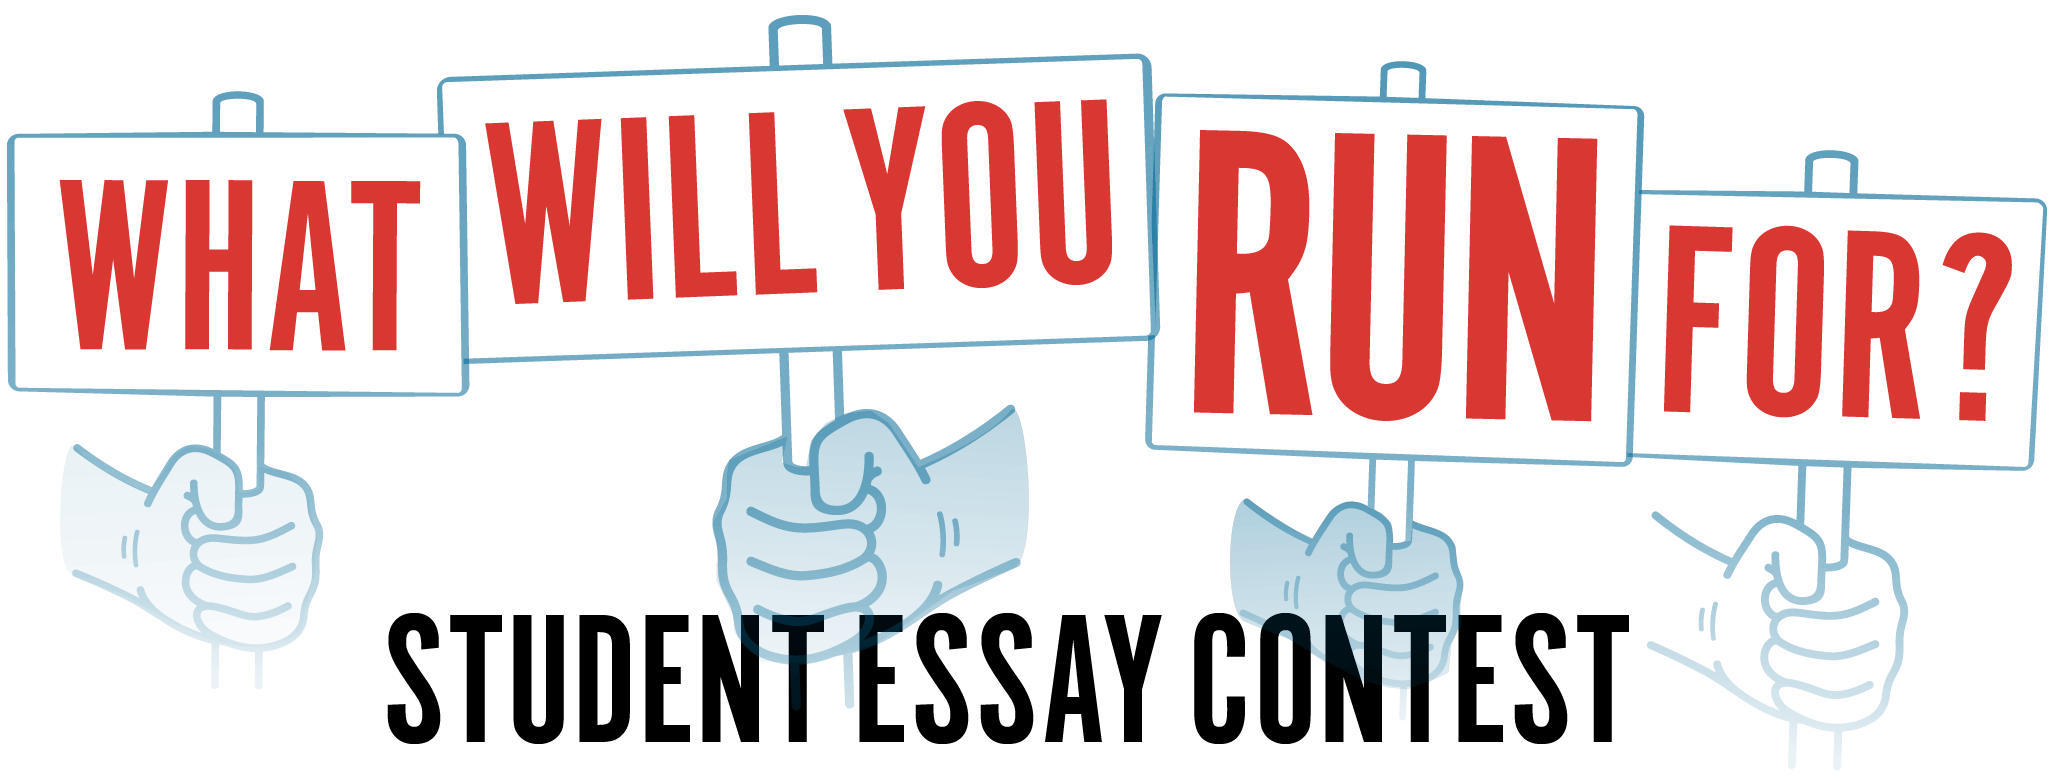 WHAT WILL YOU RUN FOR? STUDENT ESSAY CONTEST